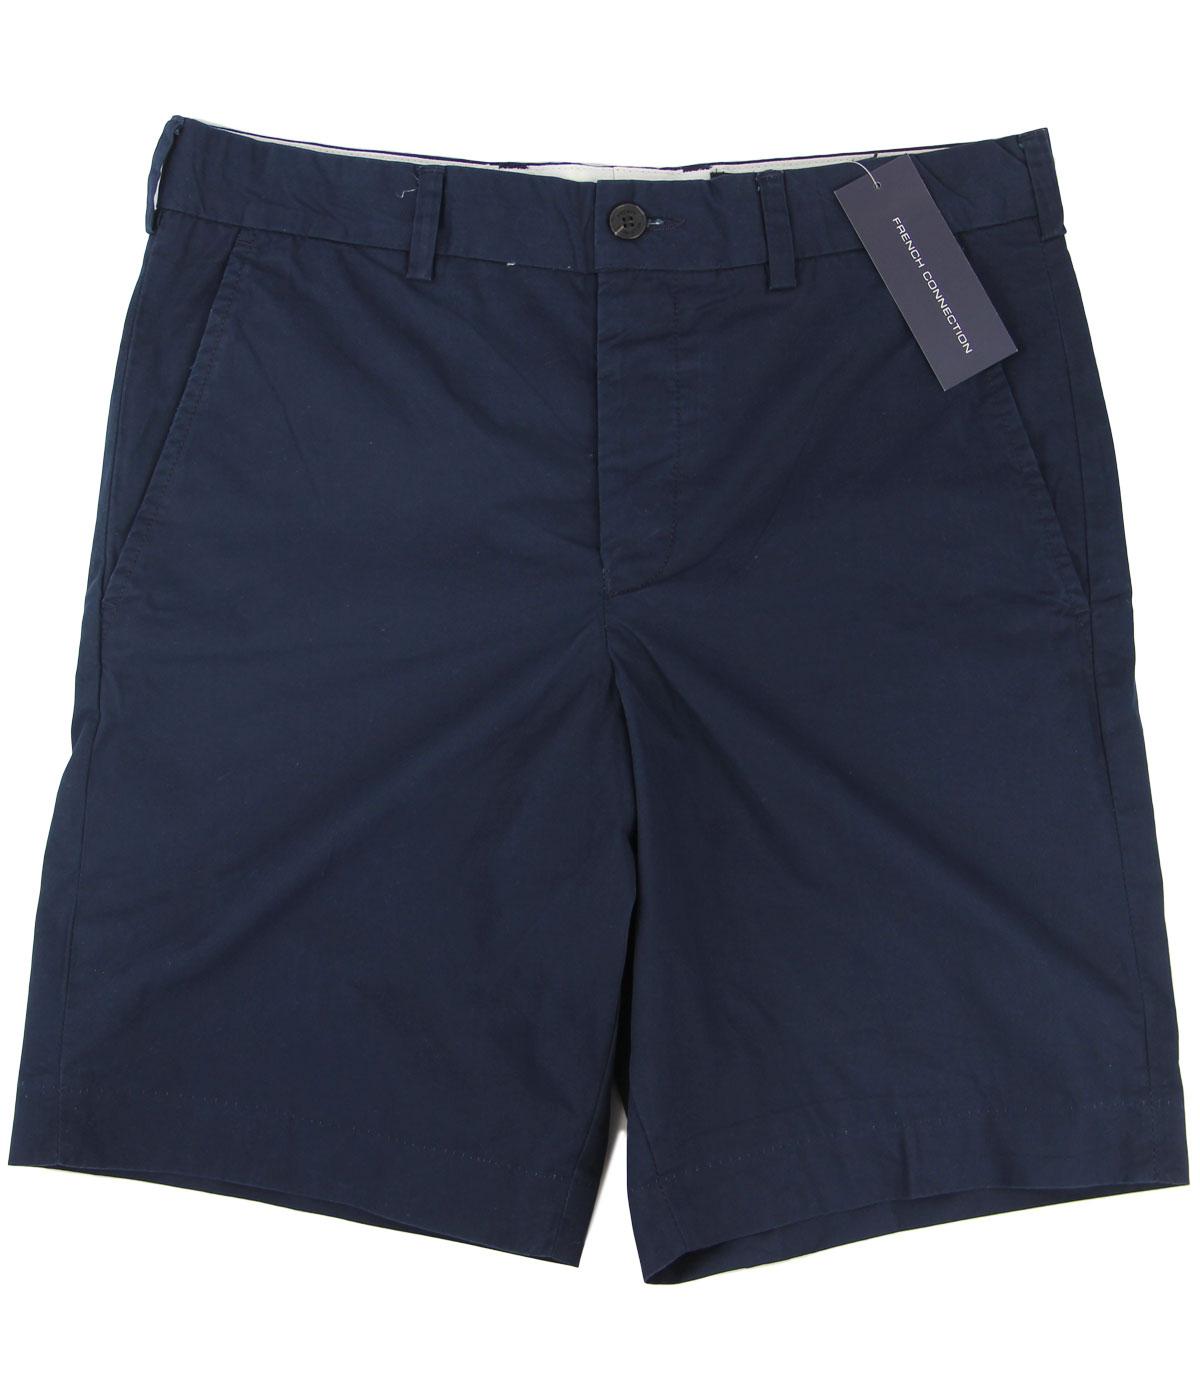 FRENCH CONNECTION Retro Peached Cotton Summer Shorts in Marine